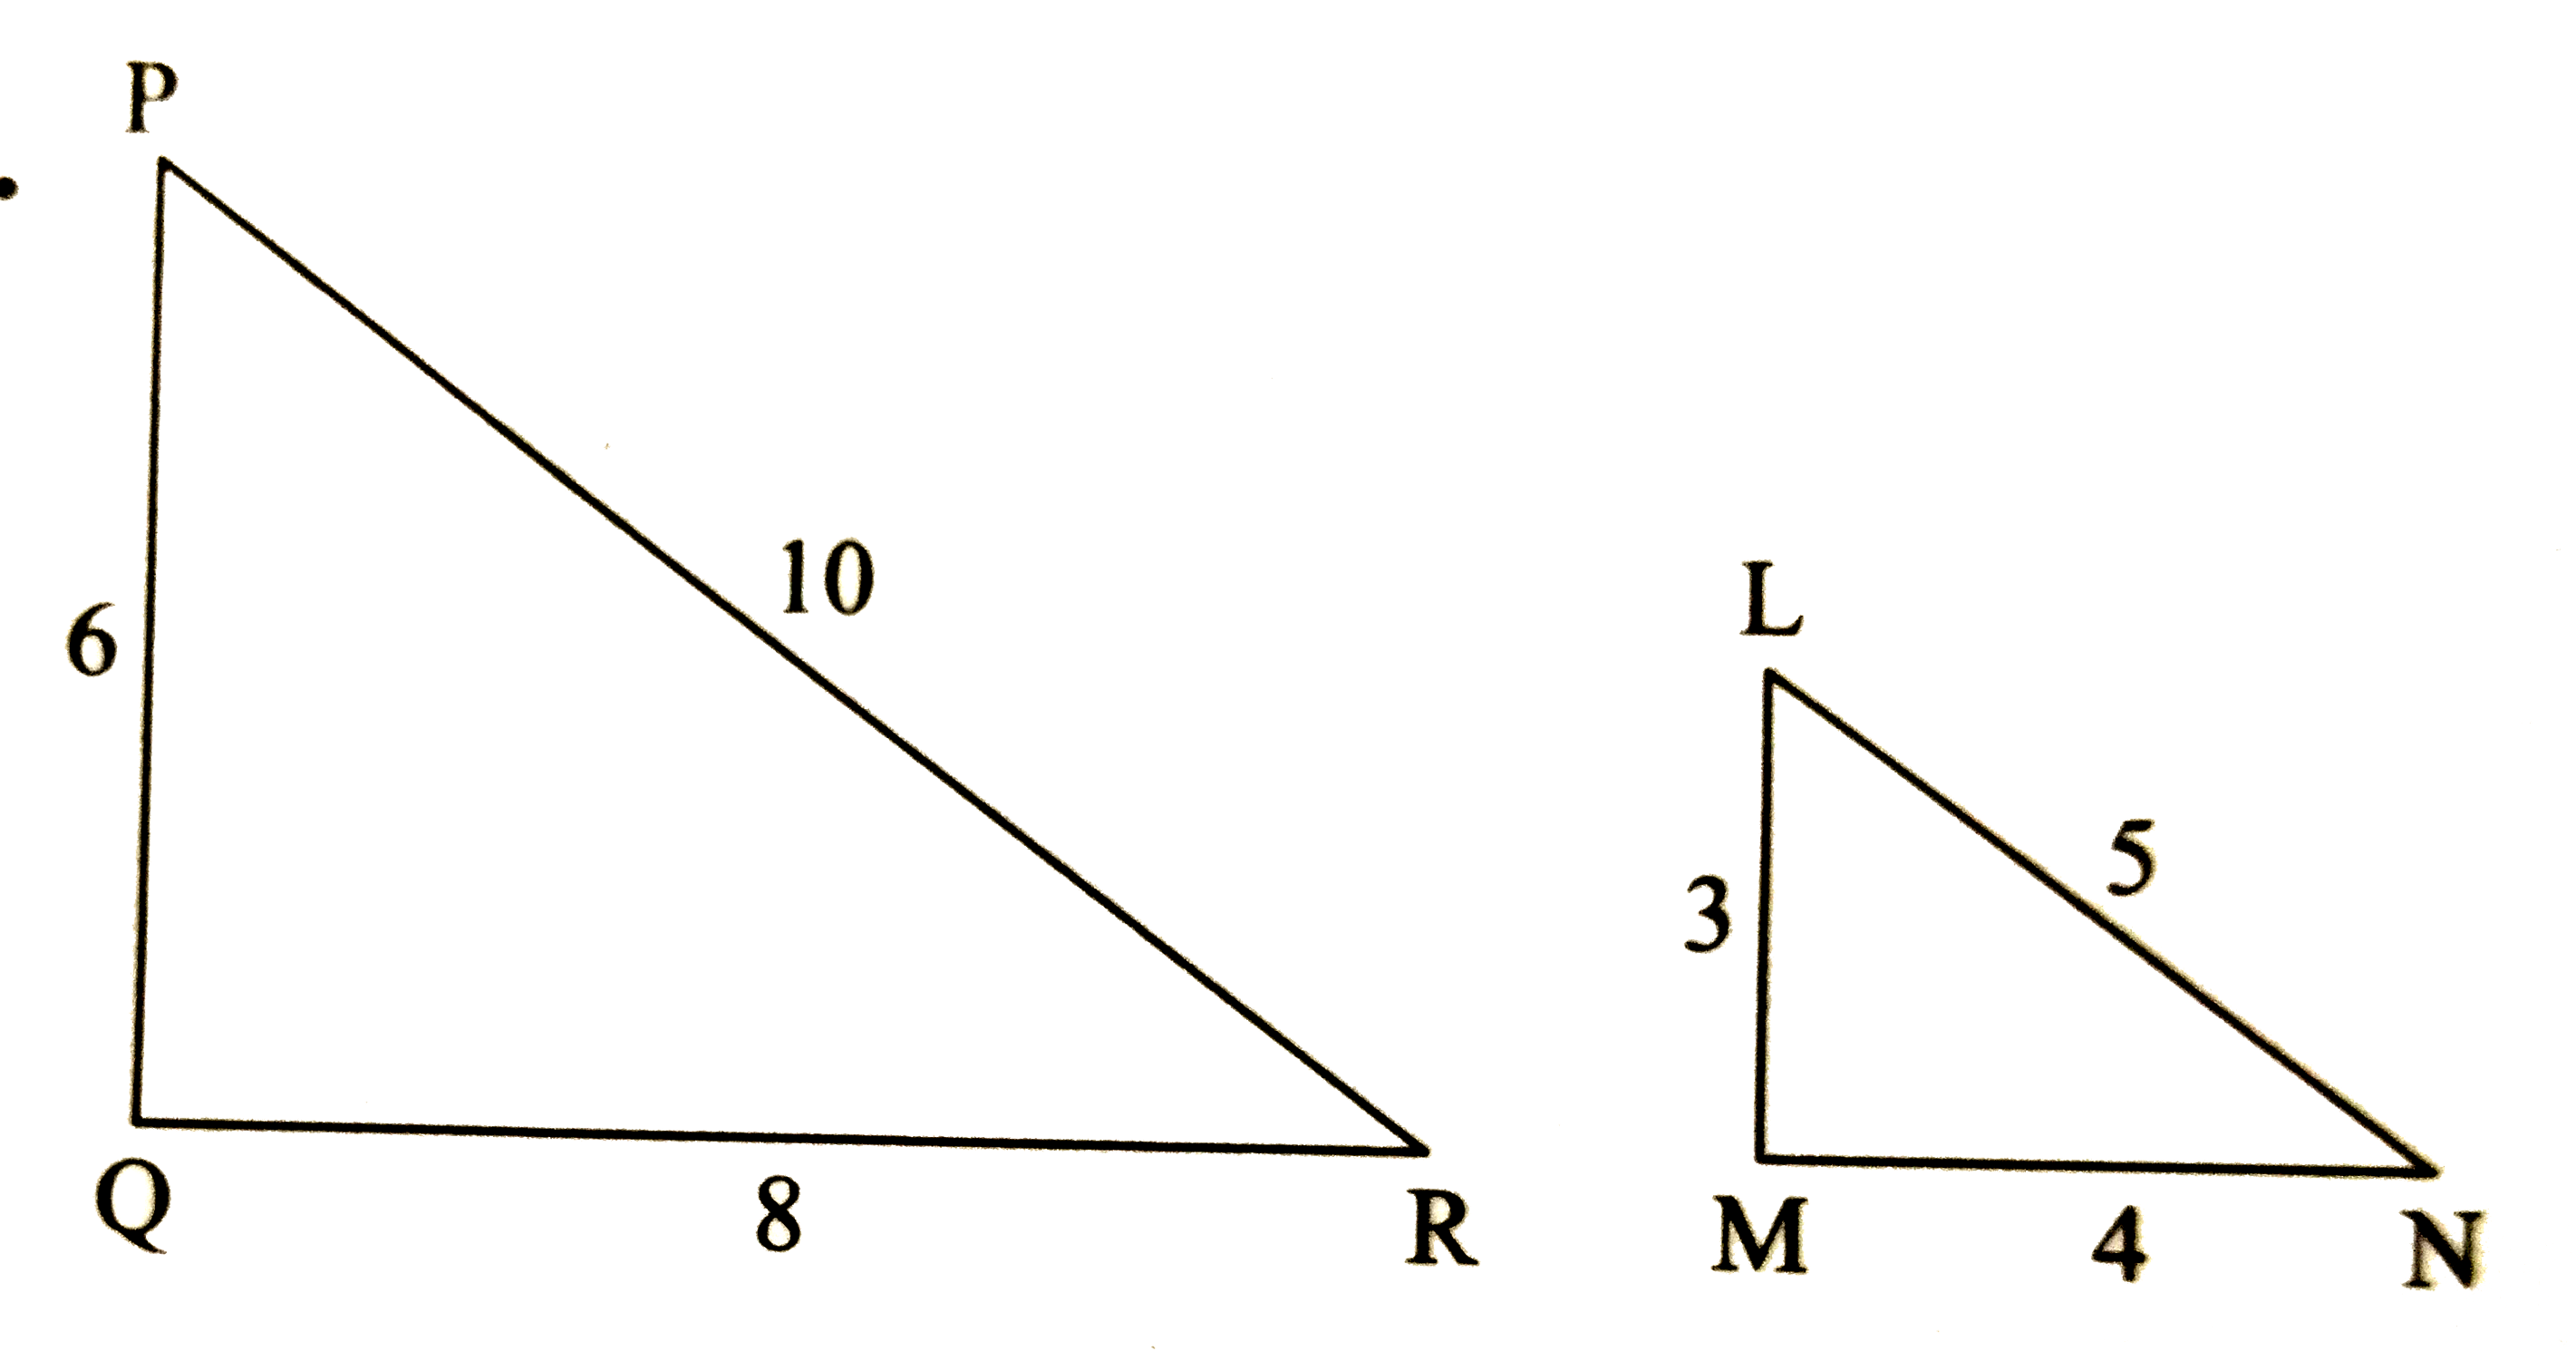 Are the triangles in the following figures similar . If yes, by which test?